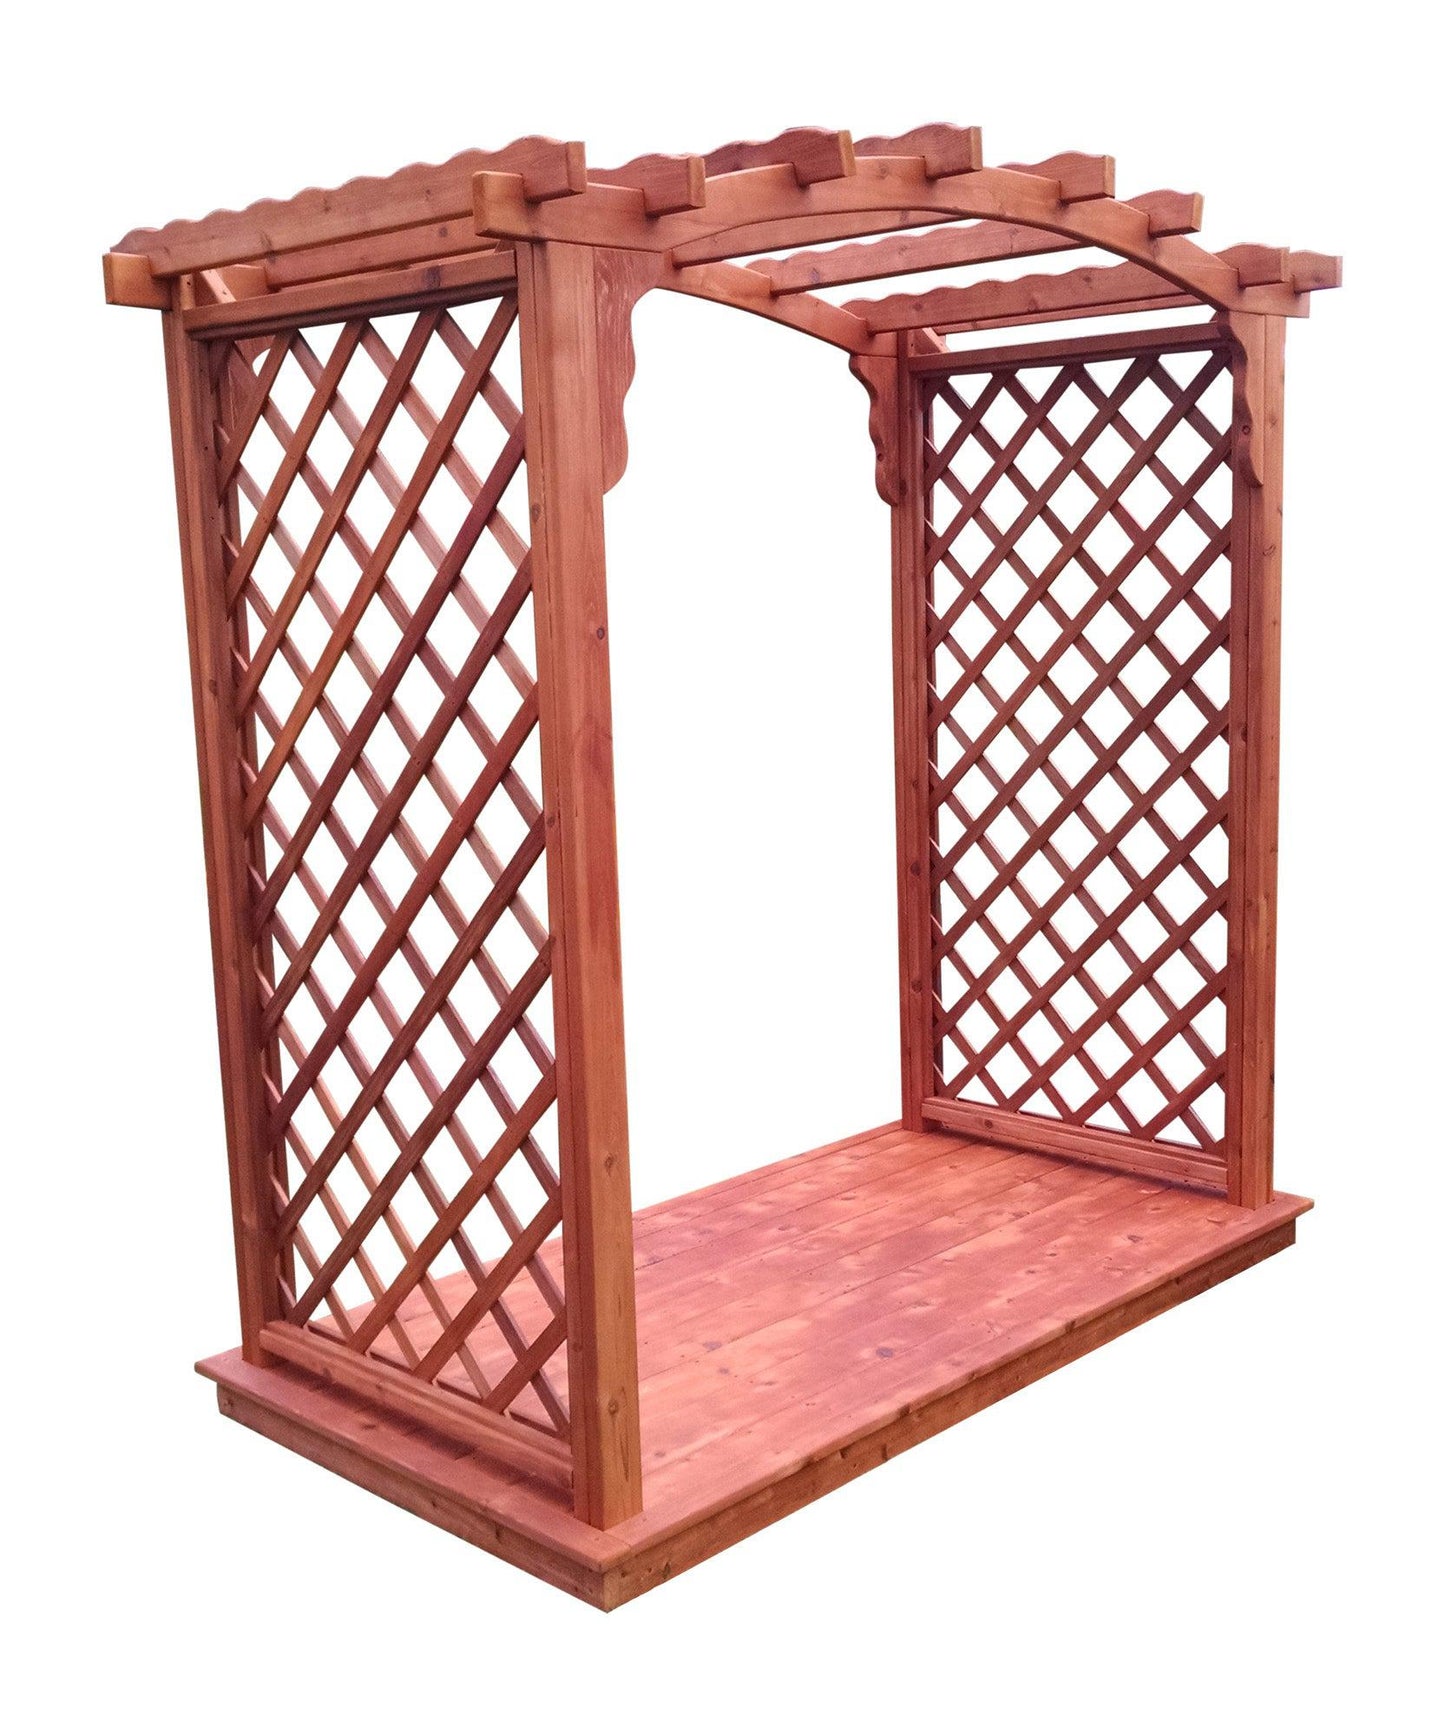 A&L Furniture Co. Western Red Cedar 6' Jamesport Arbor & Deck - LEAD TIME TO SHIP 2 WEEKS